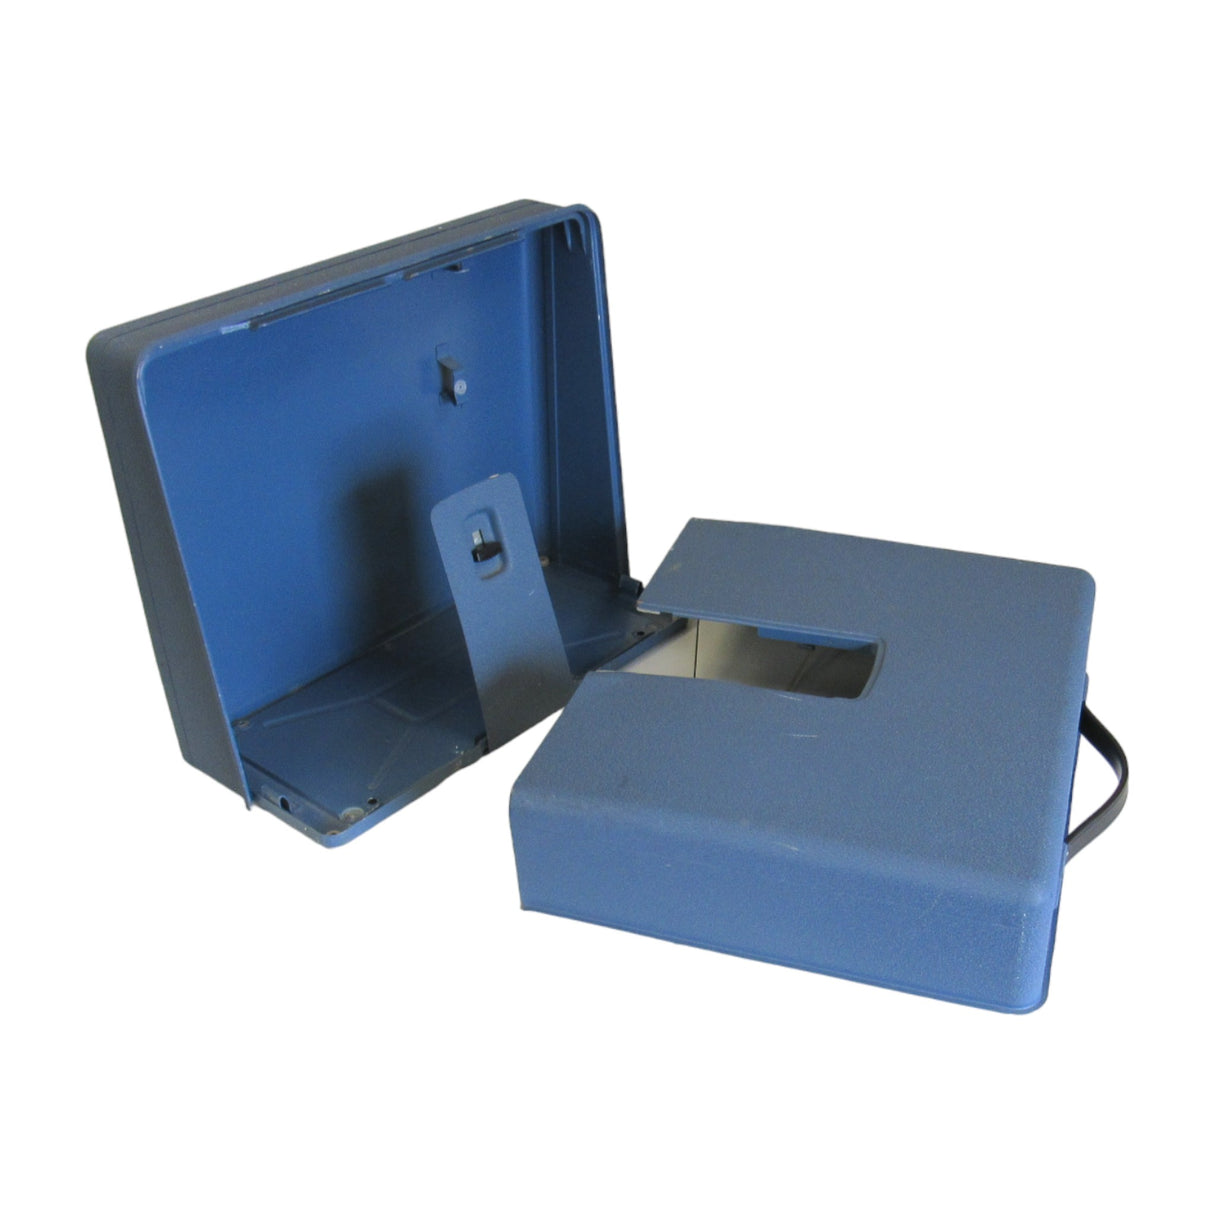 Carrying Case for Elna Model 62 Sewing Machine